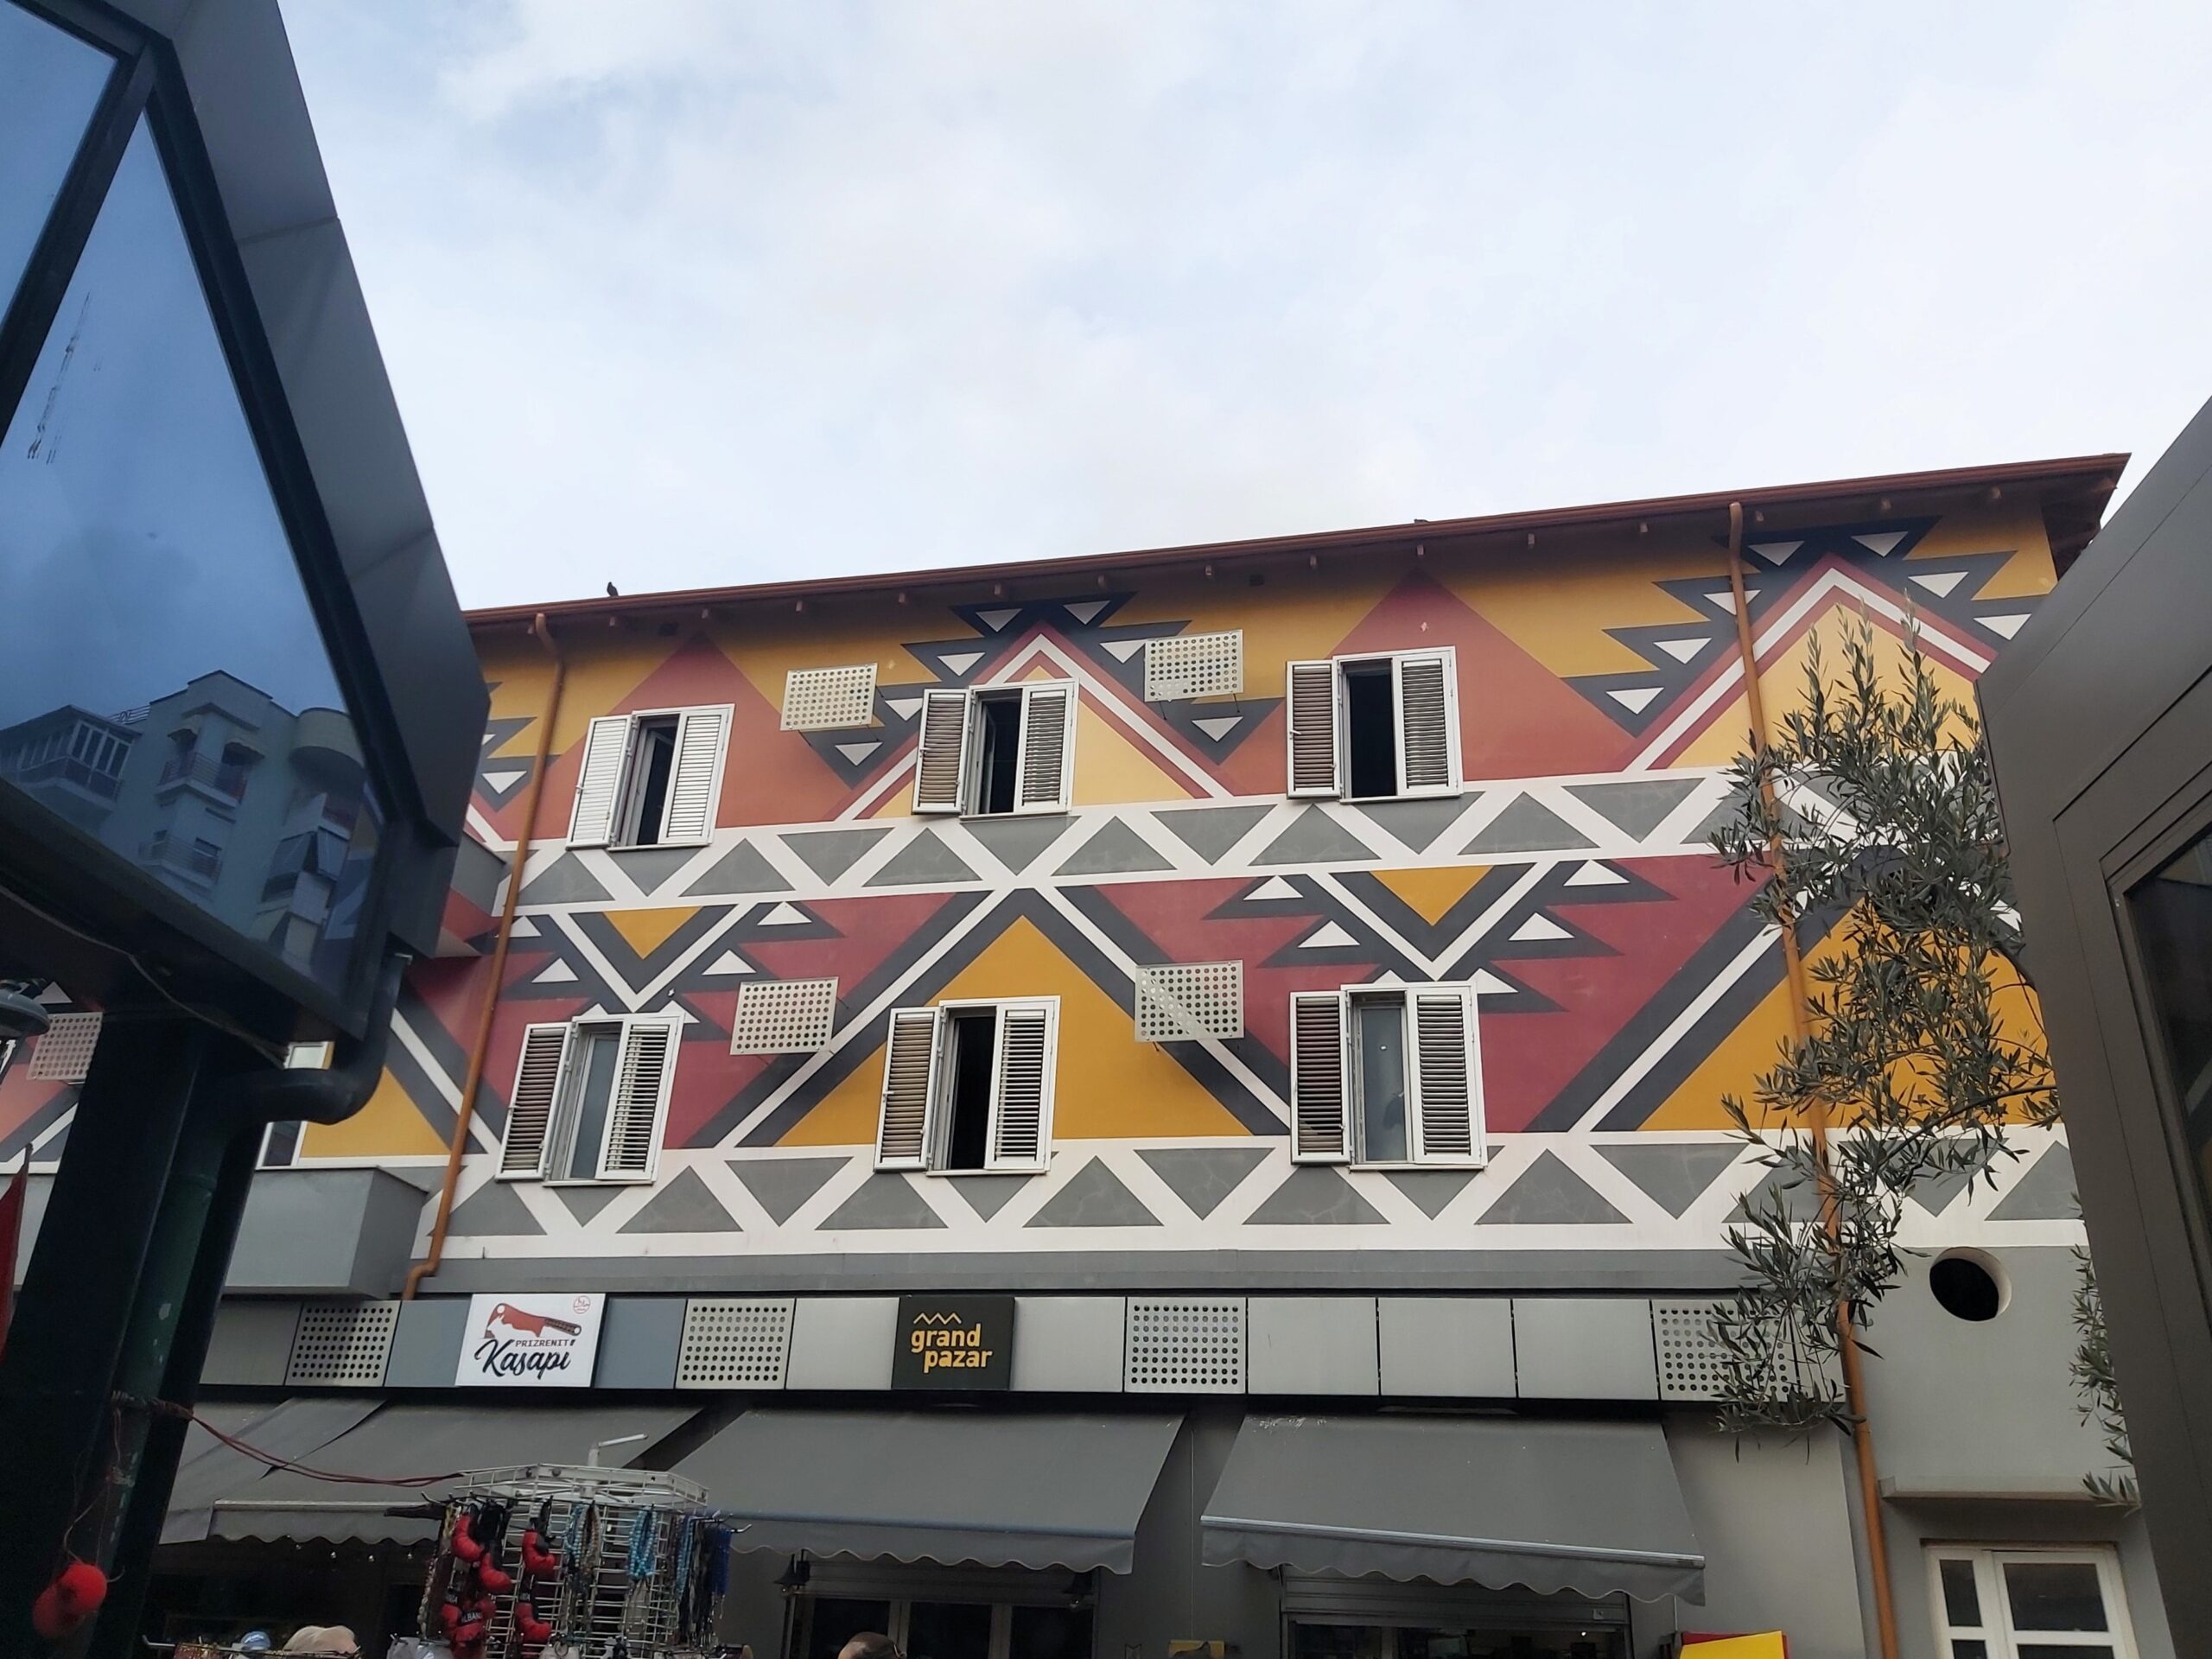 A pretty building with colourful traditional patterns painted on it in Tirana, Albania